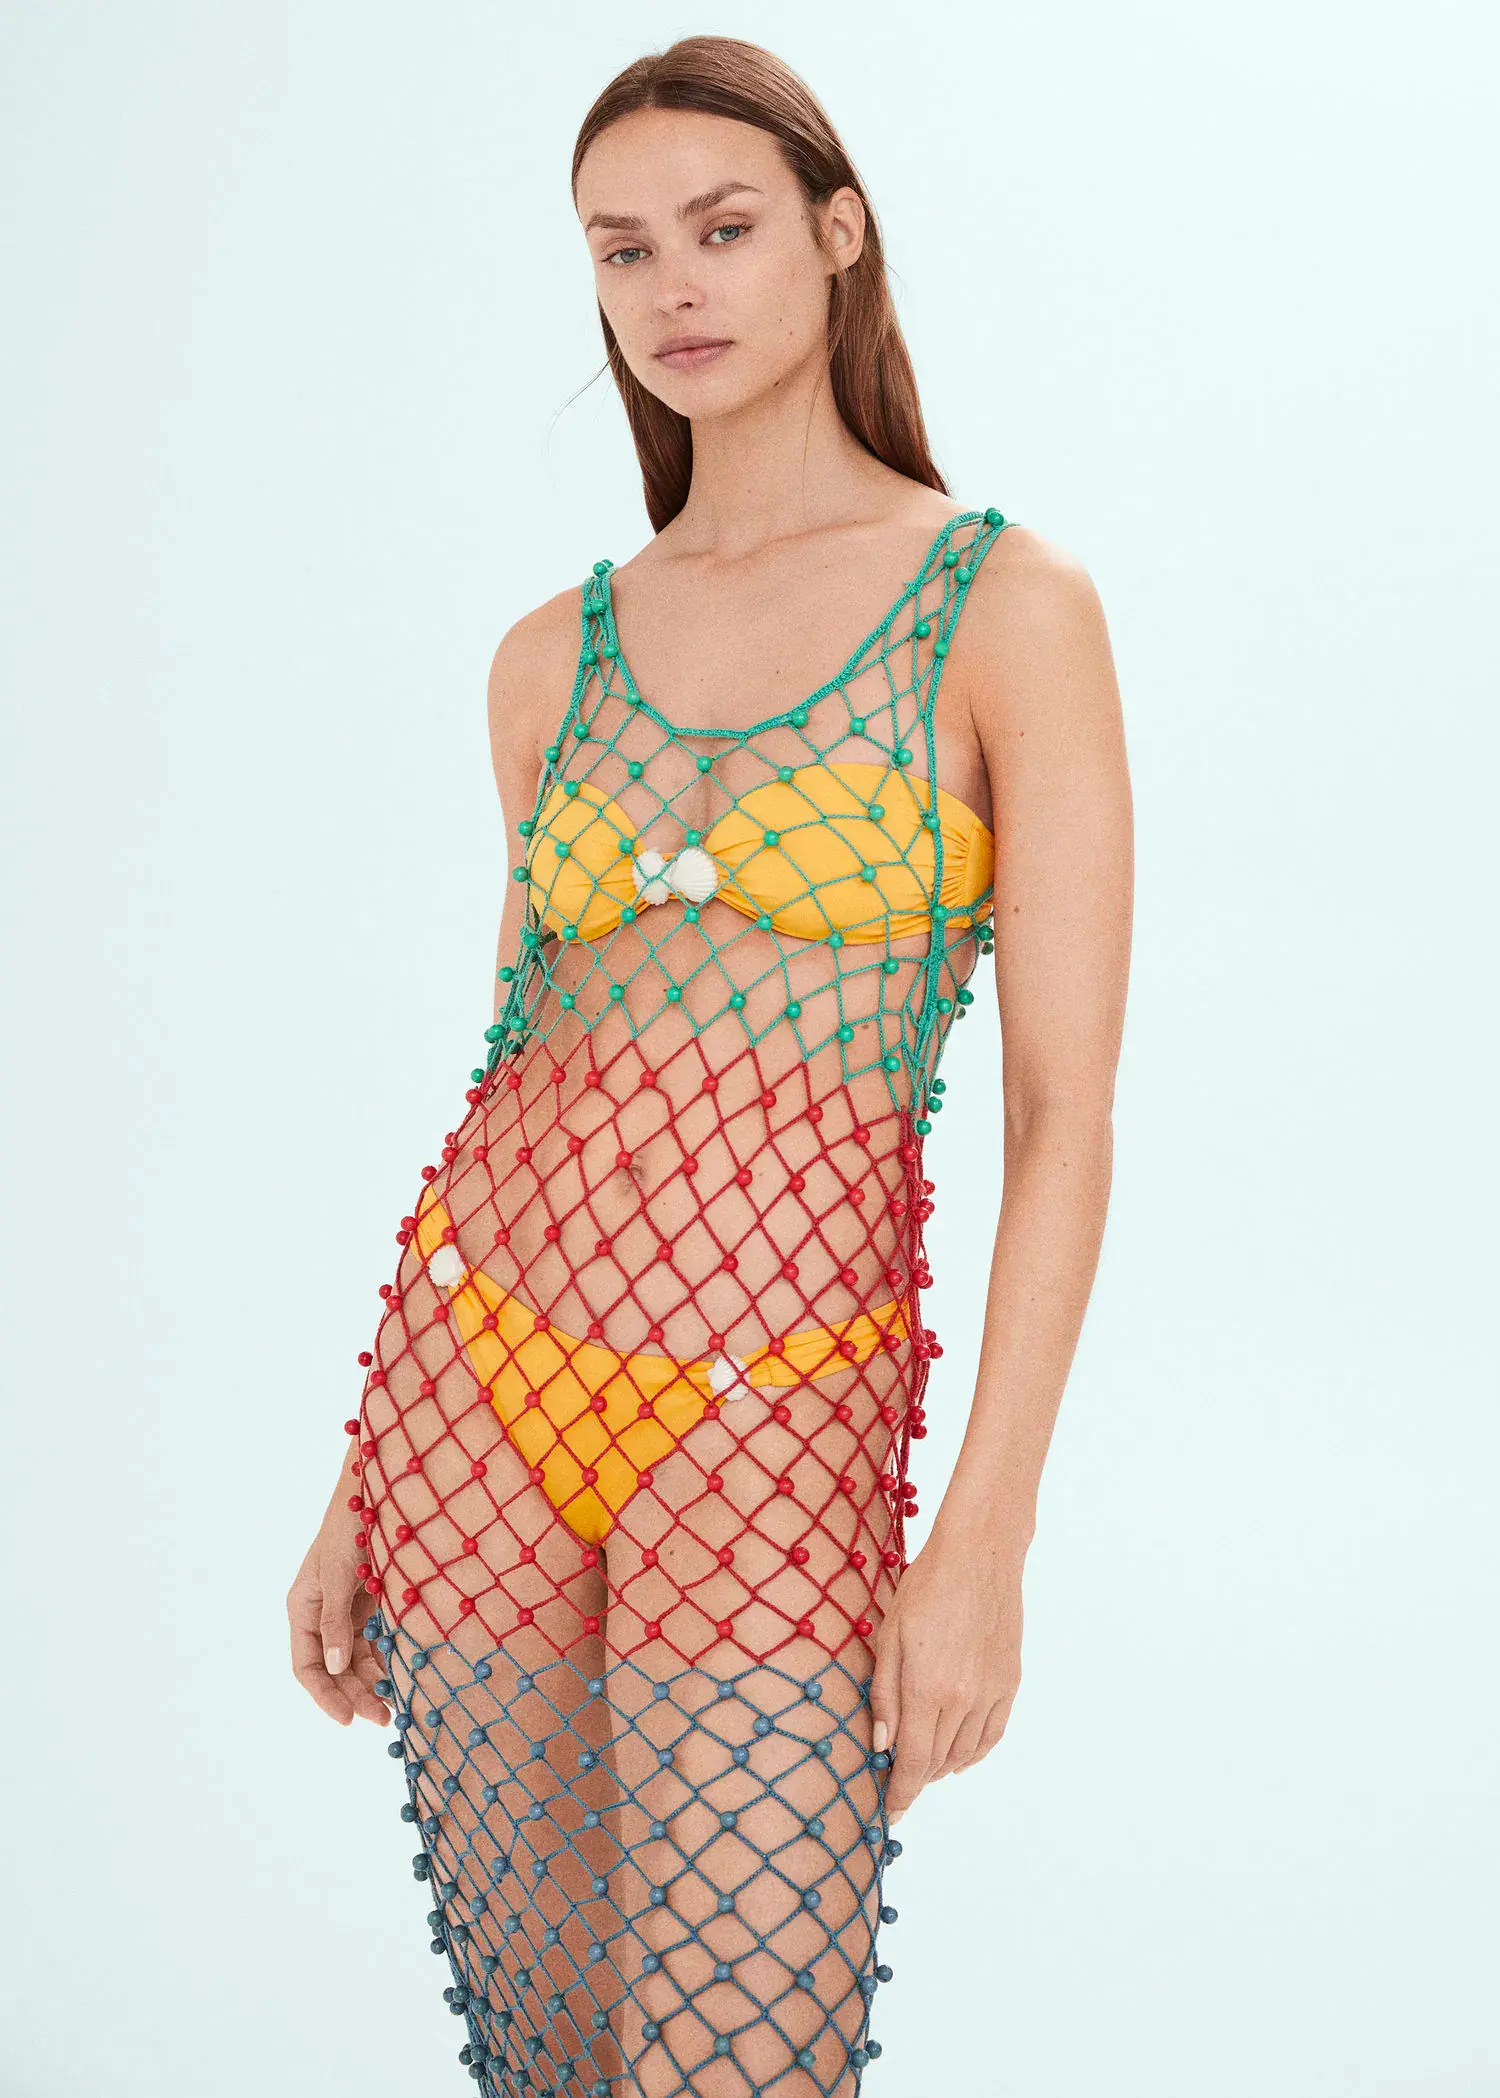 Mango Multi-coloured net dress with beads. a woman in a colorful bathing suit standing in front of a wall. 